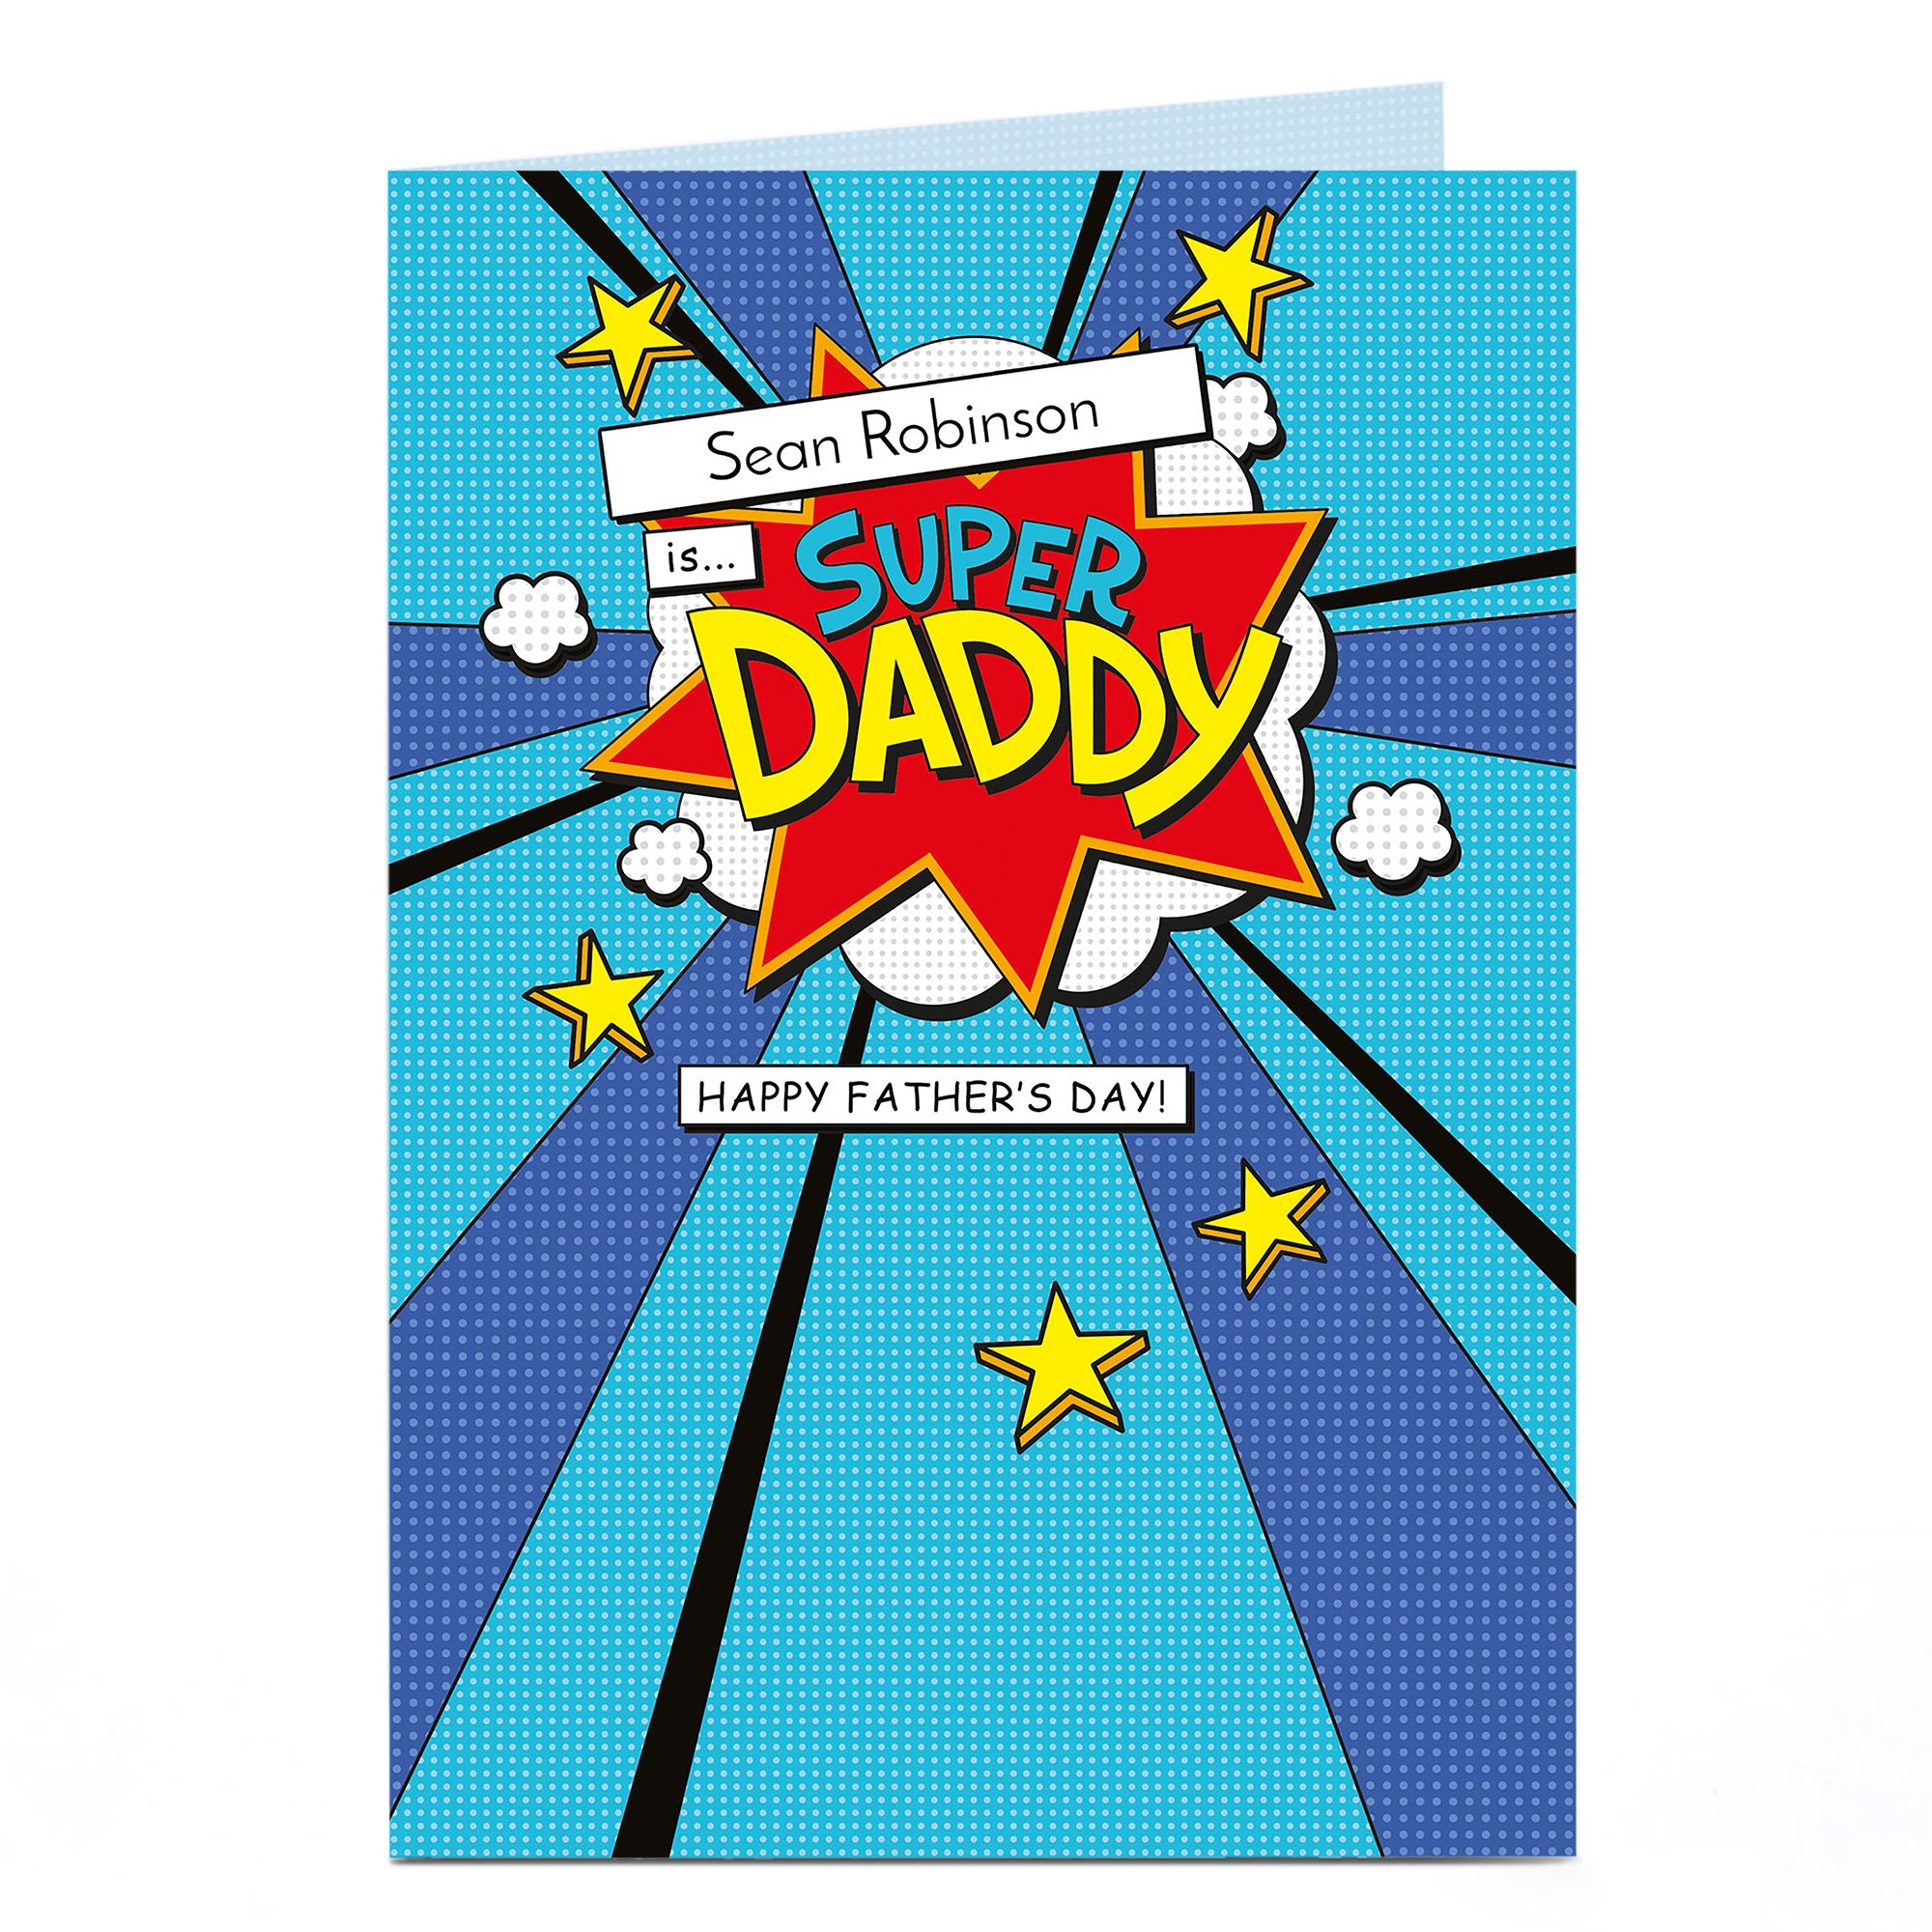 Personalised Father's Day Card - Super Daddy